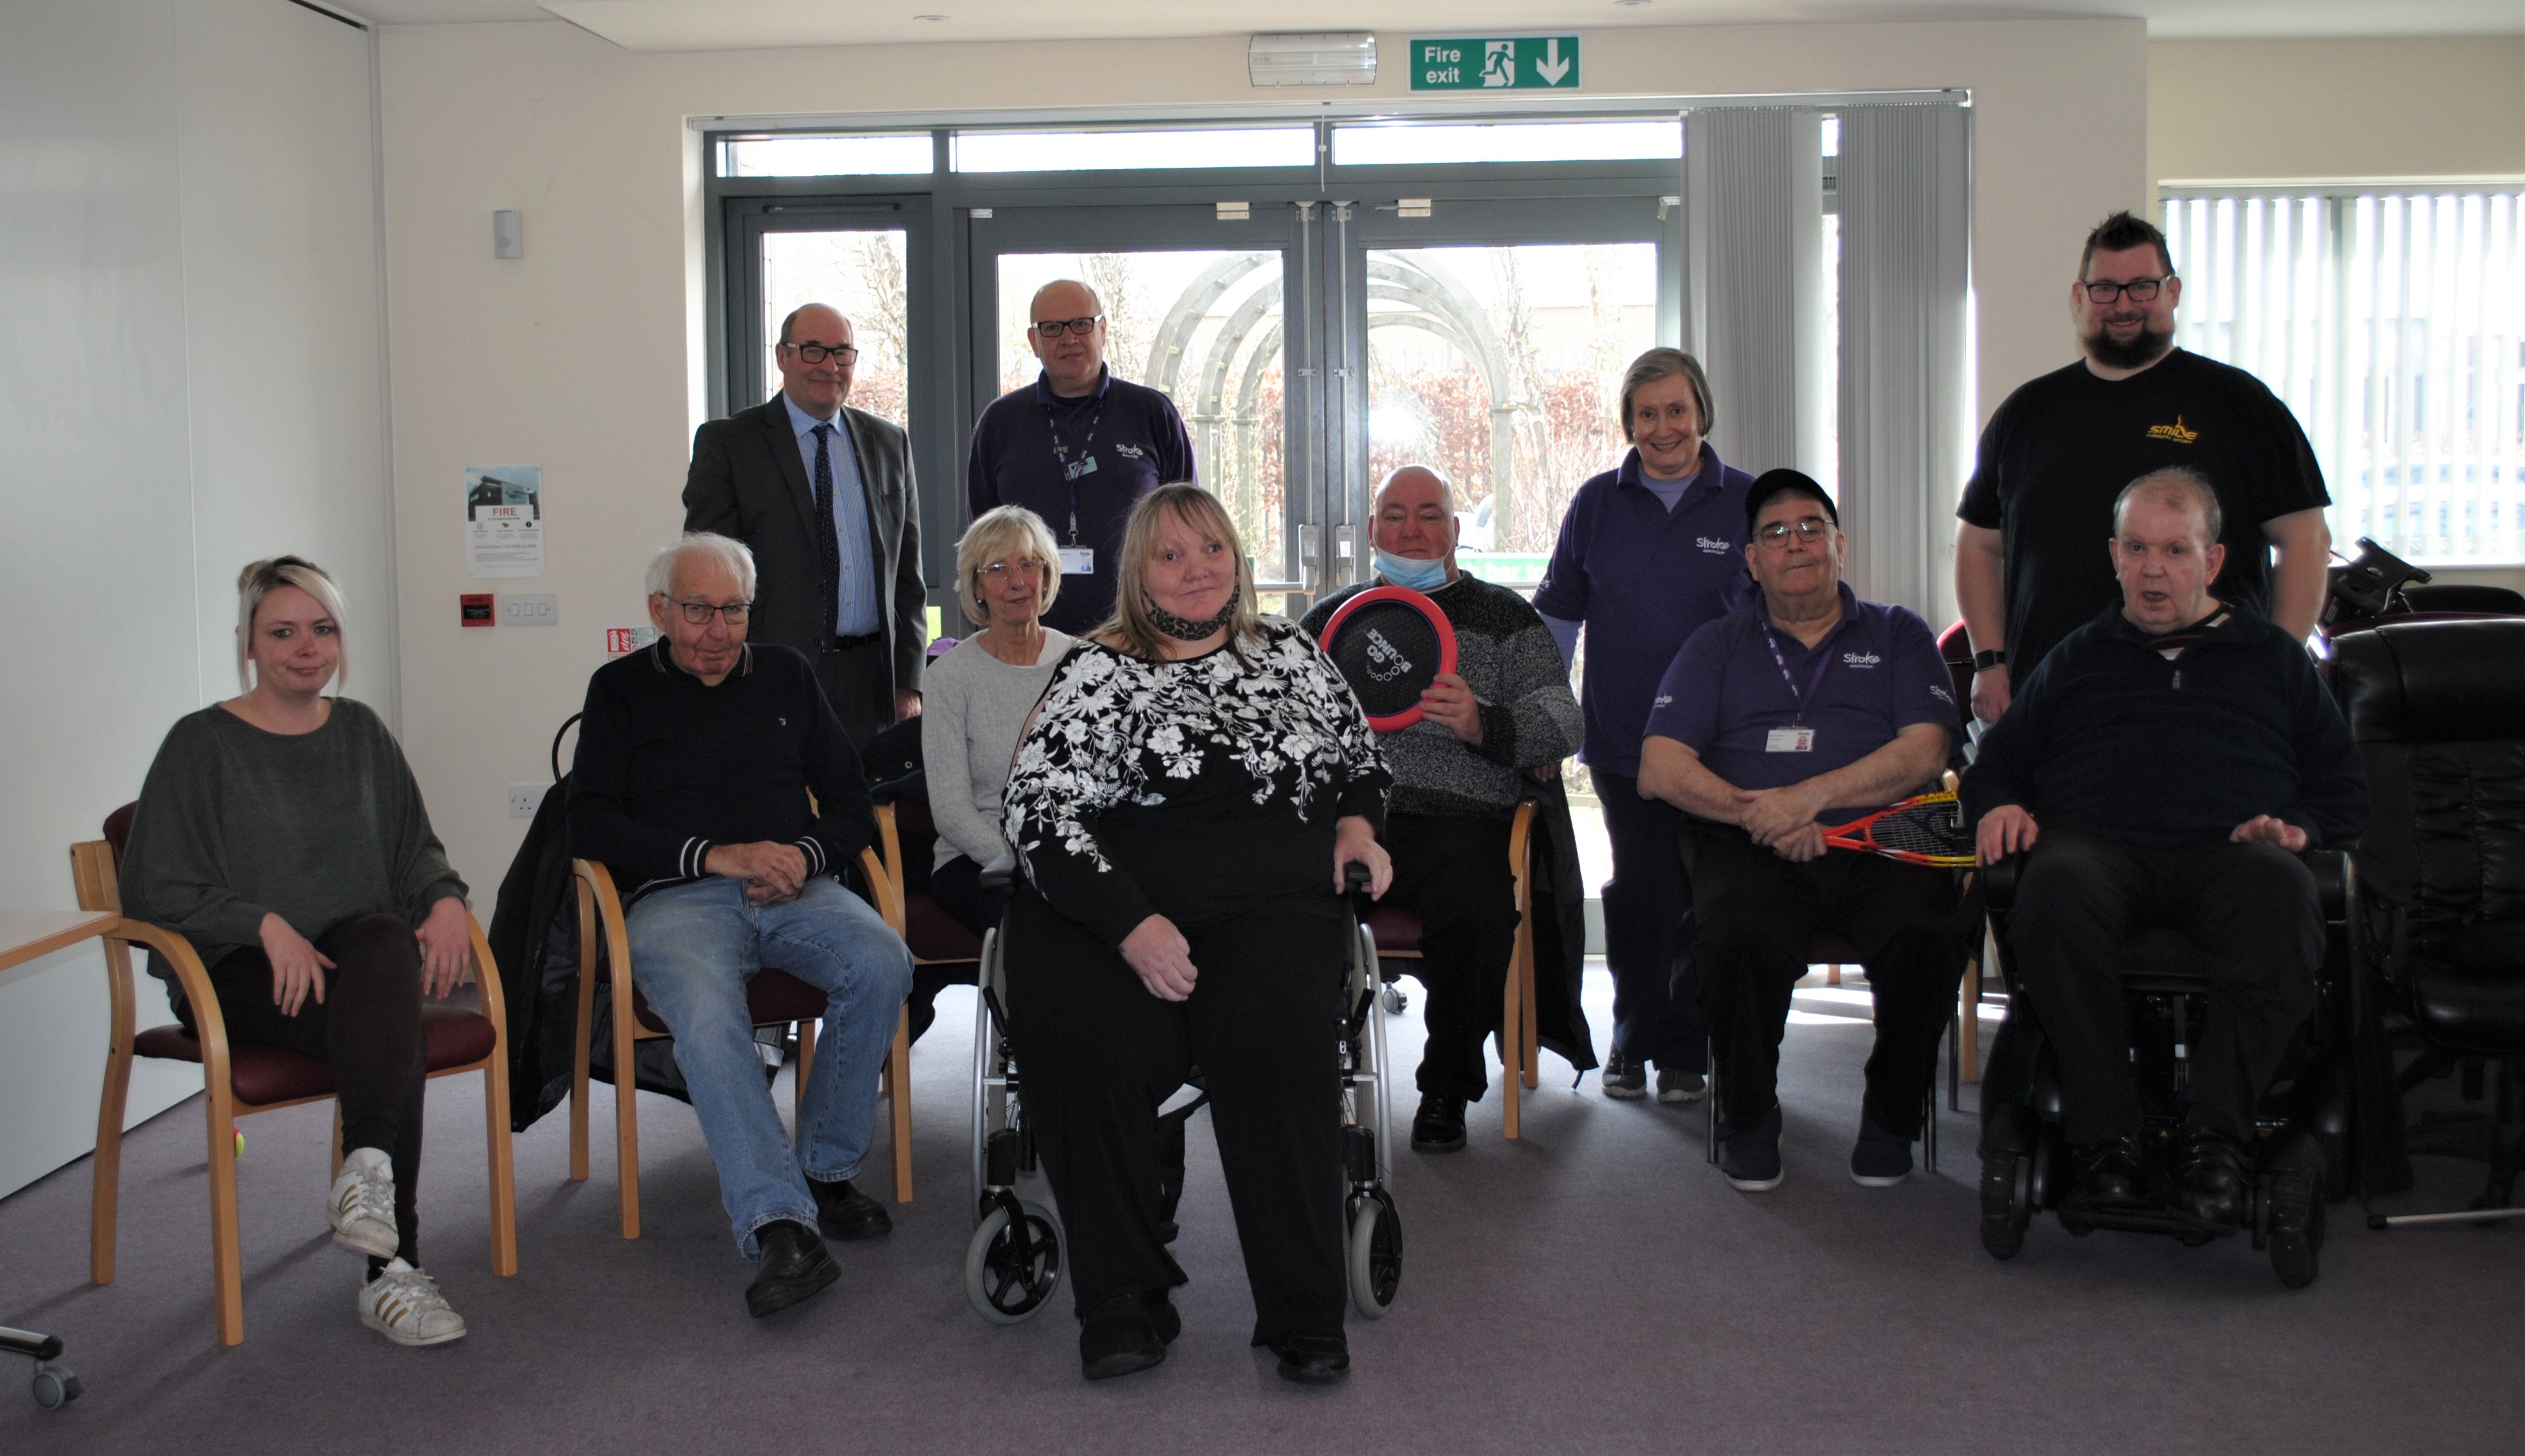 A group image of various people in the lobby of a care home.